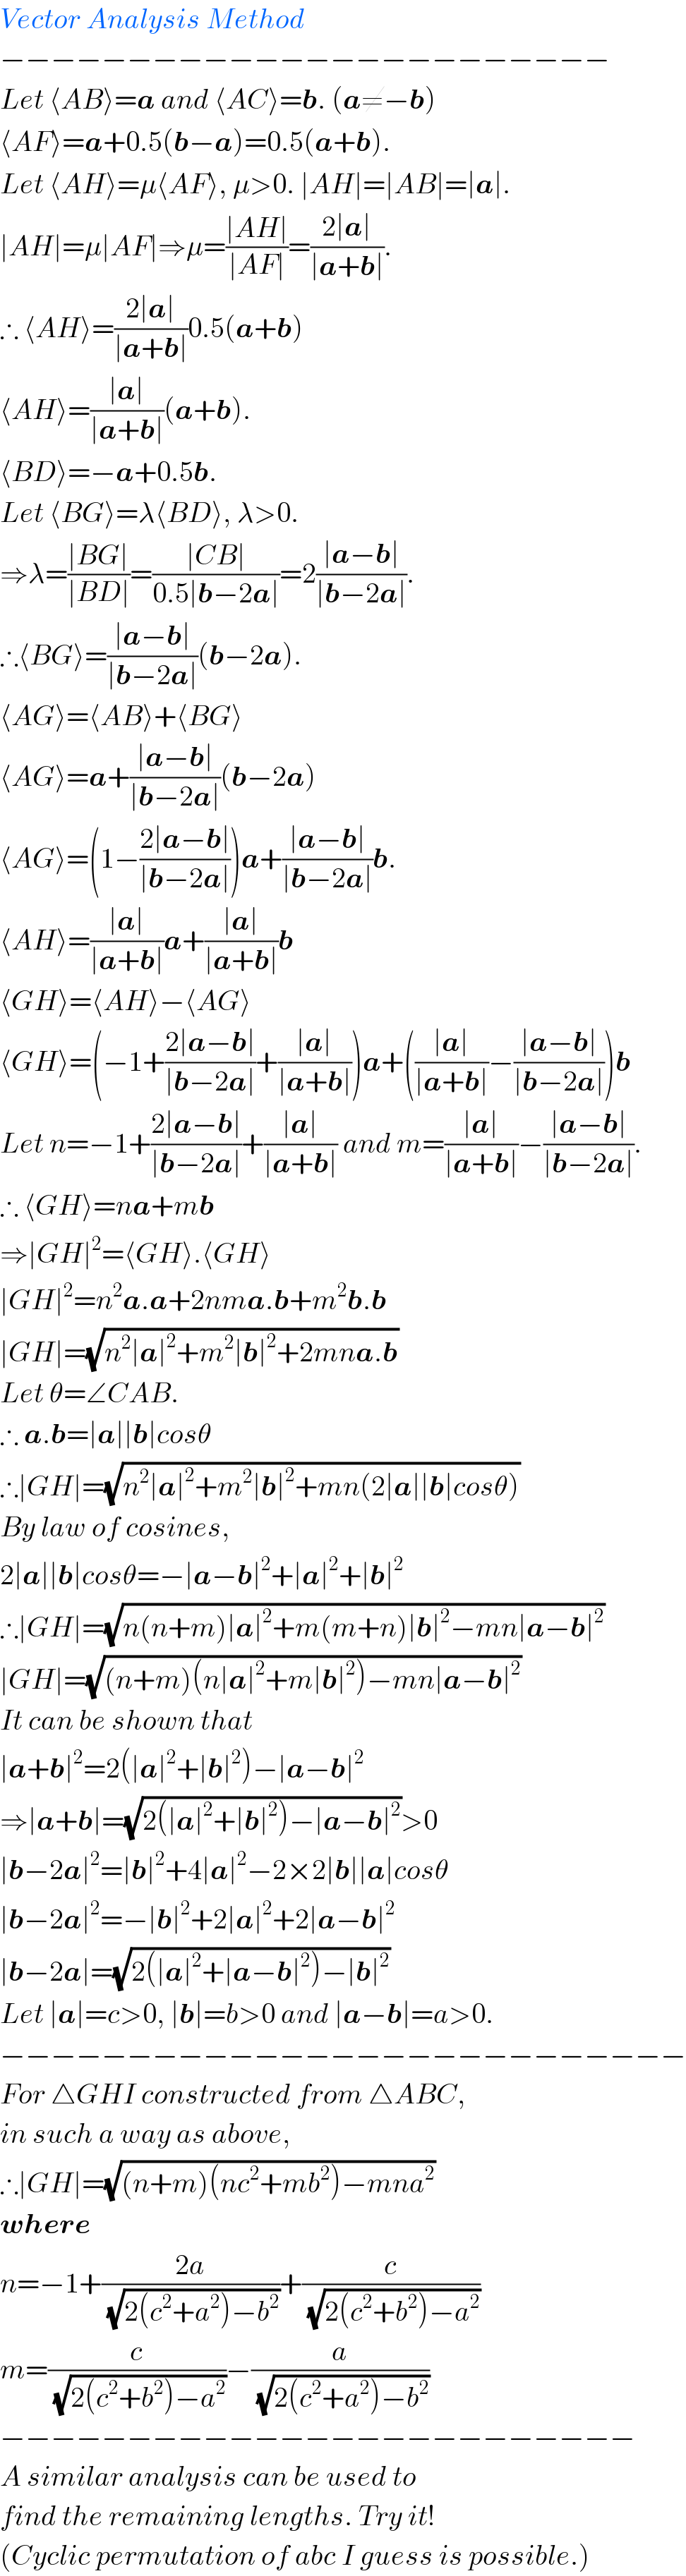 Vector Analysis Method  −−−−−−−−−−−−−−−−−−−−−−−−  Let ⟨AB⟩=a and ⟨AC⟩=b. (a≠−b)  ⟨AF⟩=a+0.5(b−a)=0.5(a+b).  Let ⟨AH⟩=μ⟨AF⟩, μ>0. ∣AH∣=∣AB∣=∣a∣.  ∣AH∣=μ∣AF∣⇒μ=((∣AH∣)/(∣AF∣))=((2∣a∣)/(∣a+b∣)).  ∴ ⟨AH⟩=((2∣a∣)/(∣a+b∣))0.5(a+b)  ⟨AH⟩=((∣a∣)/(∣a+b∣))(a+b).  ⟨BD⟩=−a+0.5b.  Let ⟨BG⟩=λ⟨BD⟩, λ>0.  ⇒λ=((∣BG∣)/(∣BD∣))=((∣CB∣)/(0.5∣b−2a∣))=2((∣a−b∣)/(∣b−2a∣)).  ∴⟨BG⟩=((∣a−b∣)/(∣b−2a∣))(b−2a).  ⟨AG⟩=⟨AB⟩+⟨BG⟩  ⟨AG⟩=a+((∣a−b∣)/(∣b−2a∣))(b−2a)  ⟨AG⟩=(1−((2∣a−b∣)/(∣b−2a∣)))a+((∣a−b∣)/(∣b−2a∣))b.  ⟨AH⟩=((∣a∣)/(∣a+b∣))a+((∣a∣)/(∣a+b∣))b  ⟨GH⟩=⟨AH⟩−⟨AG⟩  ⟨GH⟩=(−1+((2∣a−b∣)/(∣b−2a∣))+((∣a∣)/(∣a+b∣)))a+(((∣a∣)/(∣a+b∣))−((∣a−b∣)/(∣b−2a∣)))b  Let n=−1+((2∣a−b∣)/(∣b−2a∣))+((∣a∣)/(∣a+b∣)) and m=((∣a∣)/(∣a+b∣))−((∣a−b∣)/(∣b−2a∣)).  ∴ ⟨GH⟩=na+mb  ⇒∣GH∣^2 =⟨GH⟩.⟨GH⟩  ∣GH∣^2 =n^2 a.a+2nma.b+m^2 b.b  ∣GH∣=(√(n^2 ∣a∣^2 +m^2 ∣b∣^2 +2mna.b))  Let θ=∠CAB.  ∴ a.b=∣a∣∣b∣cosθ   ∴∣GH∣=(√(n^2 ∣a∣^2 +m^2 ∣b∣^2 +mn(2∣a∣∣b∣cosθ)))  By law of cosines,   2∣a∣∣b∣cosθ=−∣a−b∣^2 +∣a∣^2 +∣b∣^2   ∴∣GH∣=(√(n(n+m)∣a∣^2 +m(m+n)∣b∣^2 −mn∣a−b∣^2 ))  ∣GH∣=(√((n+m)(n∣a∣^2 +m∣b∣^2 )−mn∣a−b∣^2 ))  It can be shown that   ∣a+b∣^2 =2(∣a∣^2 +∣b∣^2 )−∣a−b∣^2   ⇒∣a+b∣=(√(2(∣a∣^2 +∣b∣^2 )−∣a−b∣^2 ))>0  ∣b−2a∣^2 =∣b∣^2 +4∣a∣^2 −2×2∣b∣∣a∣cosθ  ∣b−2a∣^2 =−∣b∣^2 +2∣a∣^2 +2∣a−b∣^2   ∣b−2a∣=(√(2(∣a∣^2 +∣a−b∣^2 )−∣b∣^2 ))  Let ∣a∣=c>0, ∣b∣=b>0 and ∣a−b∣=a>0.  −−−−−−−−−−−−−−−−−−−−−−−−−−−  For △GHI constructed from △ABC,  in such a way as above,  ∴∣GH∣=(√((n+m)(nc^2 +mb^2 )−mna^2 ))  where  n=−1+((2a)/(√(2(c^2 +a^2 )−b^2 )))+(c/(√(2(c^2 +b^2 )−a^2 )))  m=(c/(√(2(c^2 +b^2 )−a^2 )))−(a/(√(2(c^2 +a^2 )−b^2 )))  −−−−−−−−−−−−−−−−−−−−−−−−−  A similar analysis can be used to  find the remaining lengths. Try it!  (Cyclic permutation of abc I guess is possible.)  